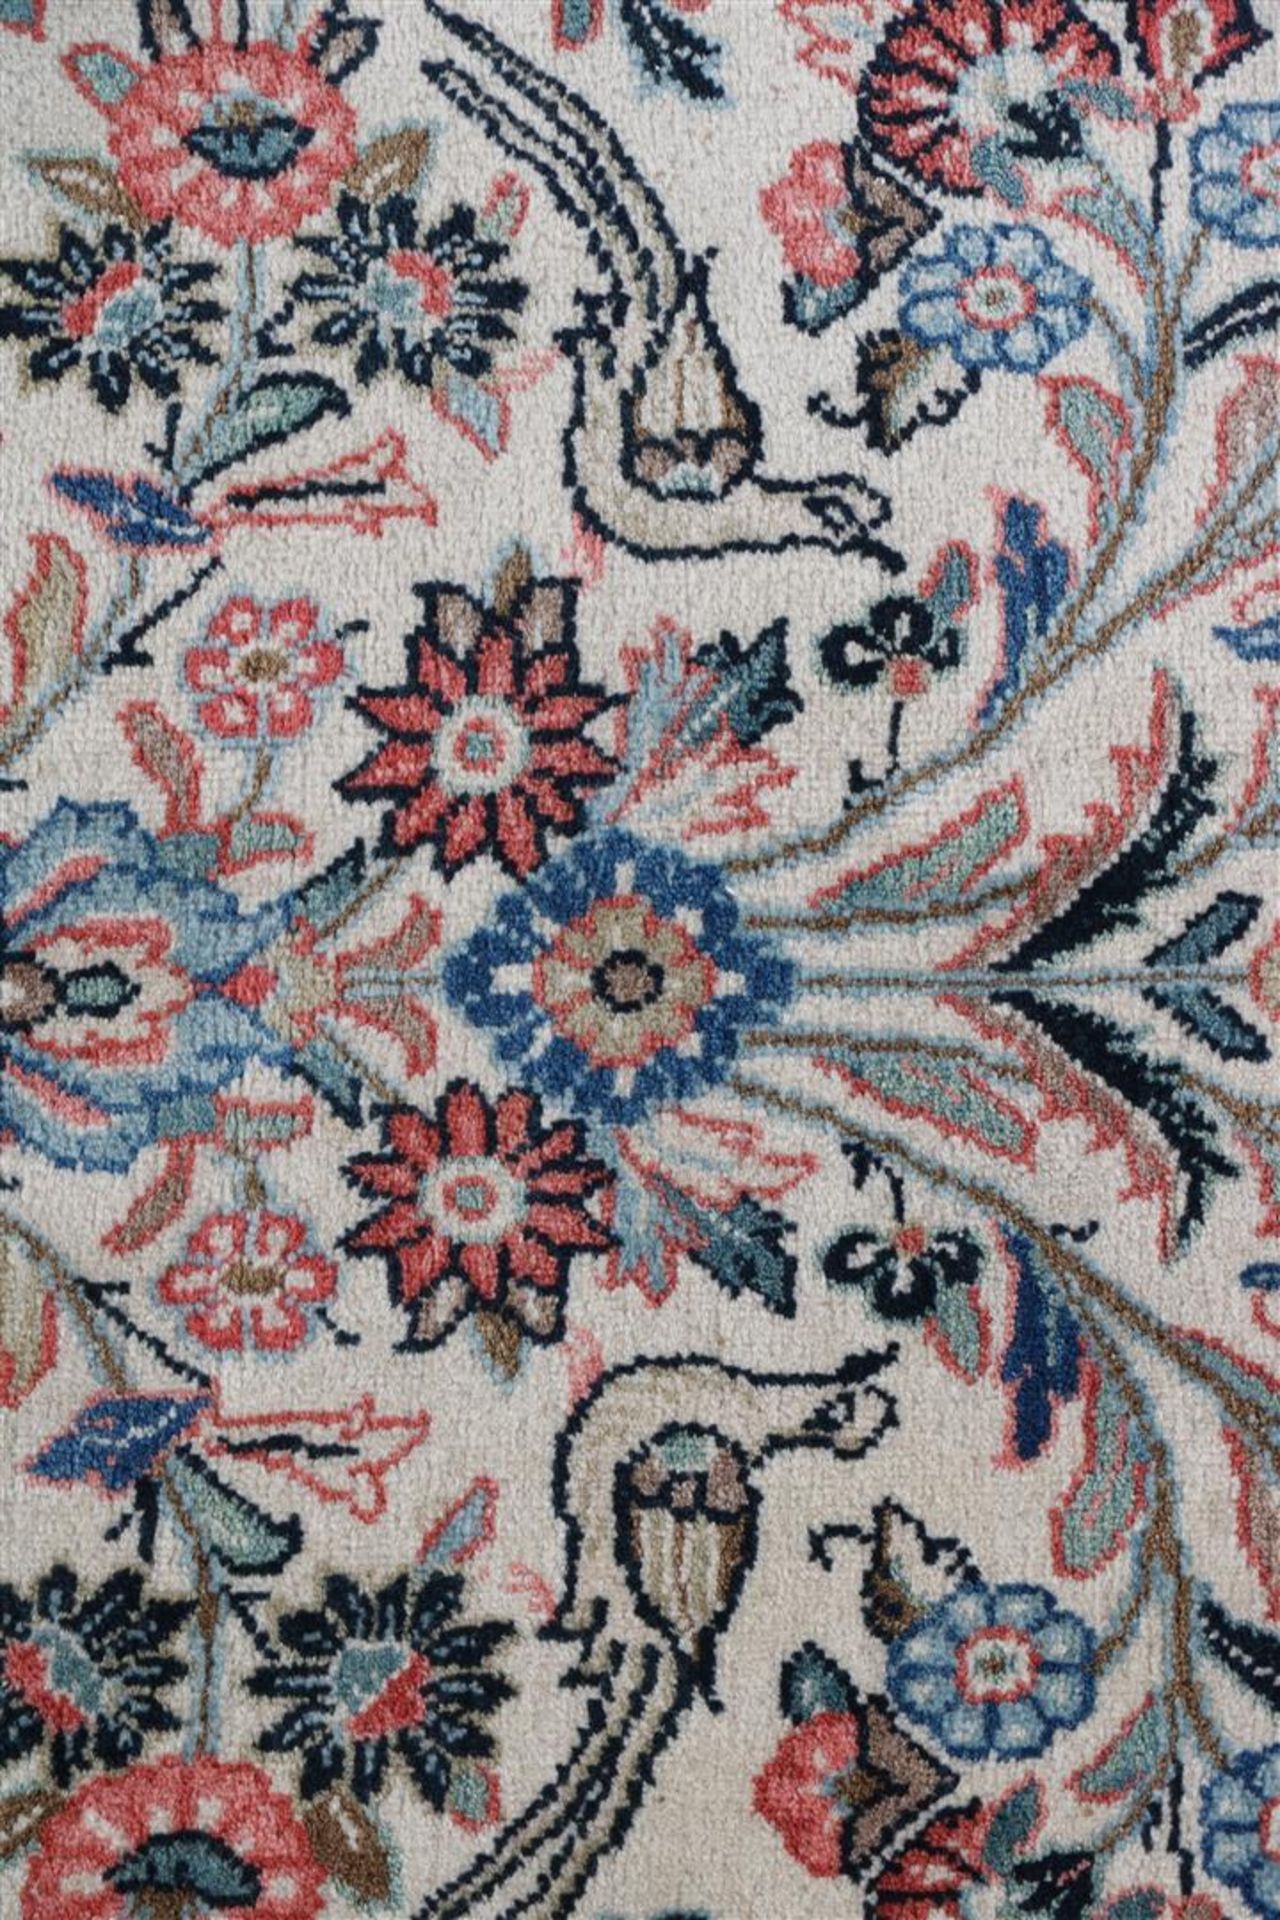 Hand-knotted Ispahan carpet - Image 3 of 5